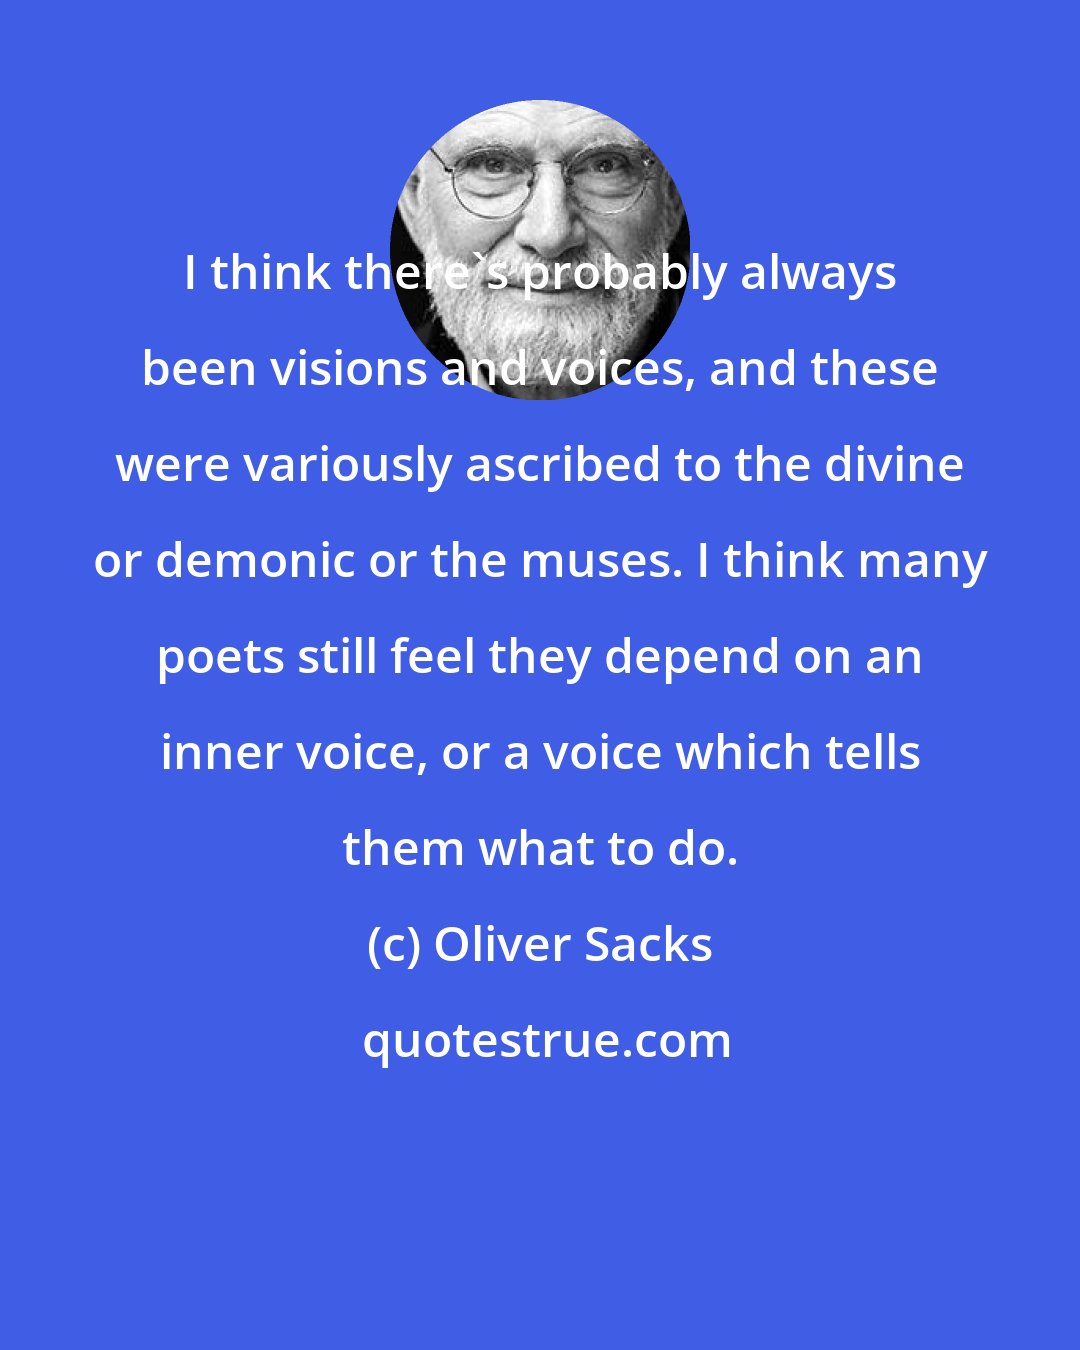 Oliver Sacks: I think there's probably always been visions and voices, and these were variously ascribed to the divine or demonic or the muses. I think many poets still feel they depend on an inner voice, or a voice which tells them what to do.